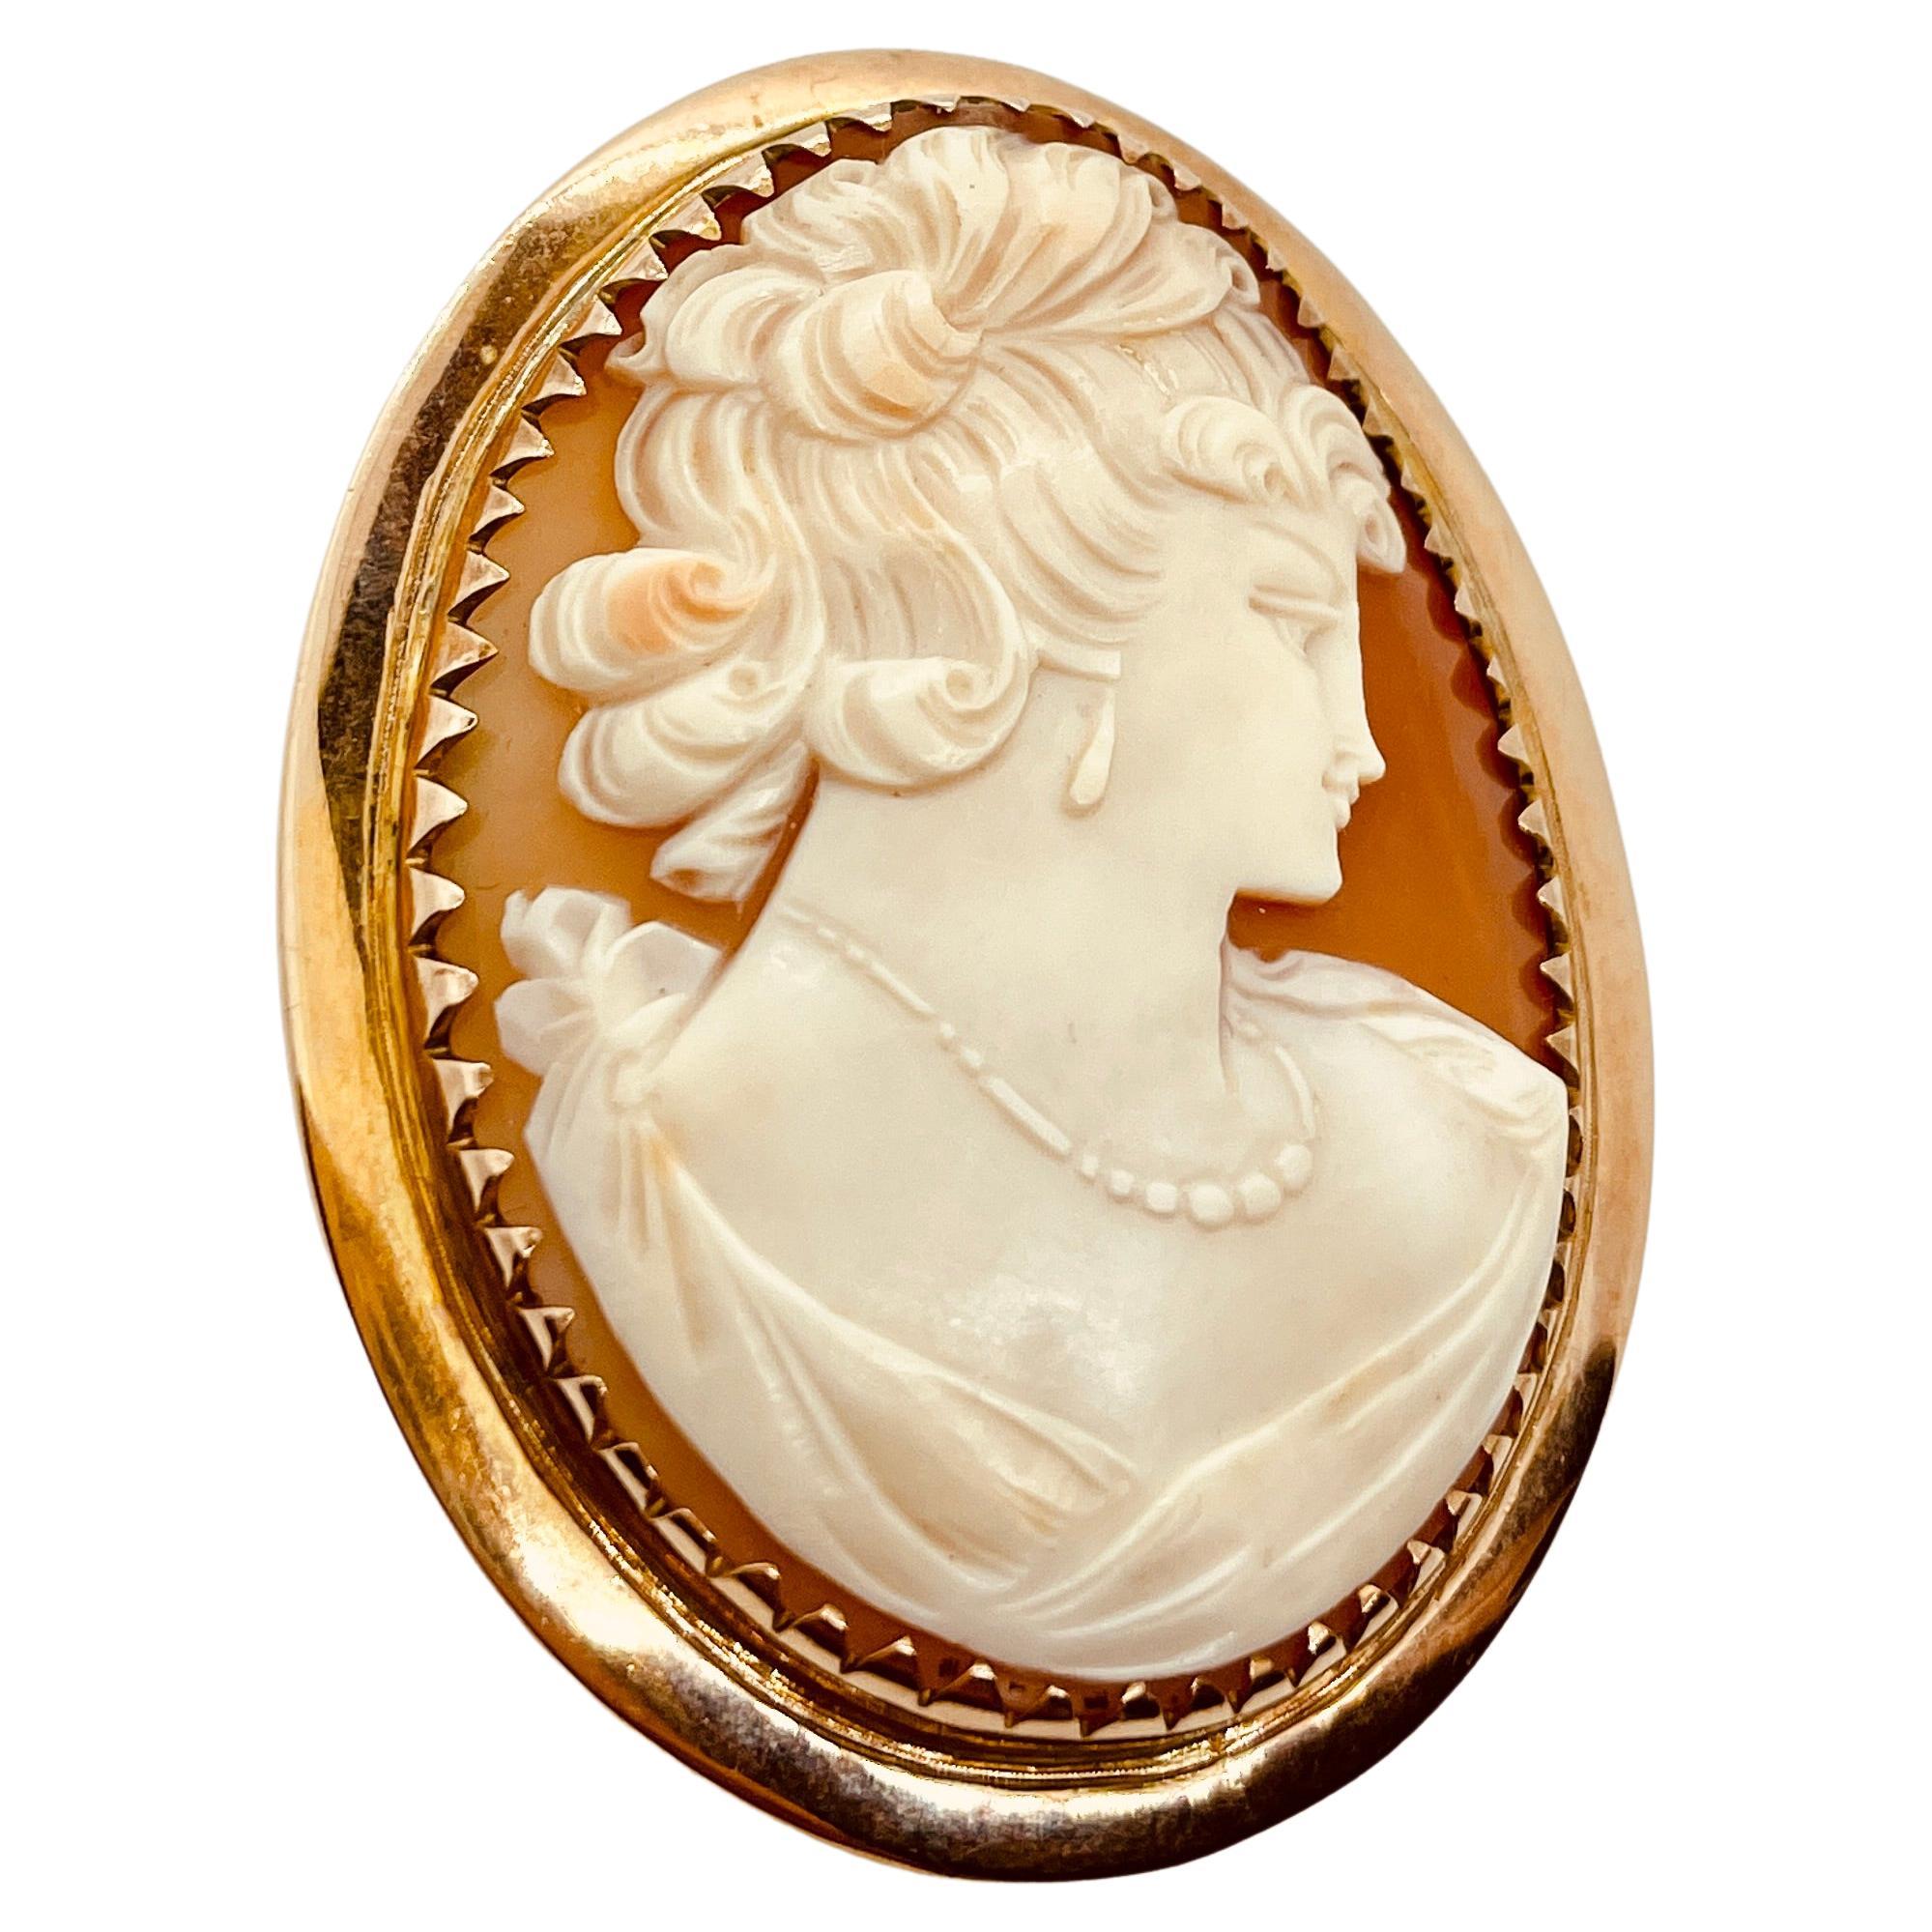 Neoclassical Vintage 9ct Gold Cameo Brooch NeoClassical Lady Wearing Earrings Necklace c1940s For Sale